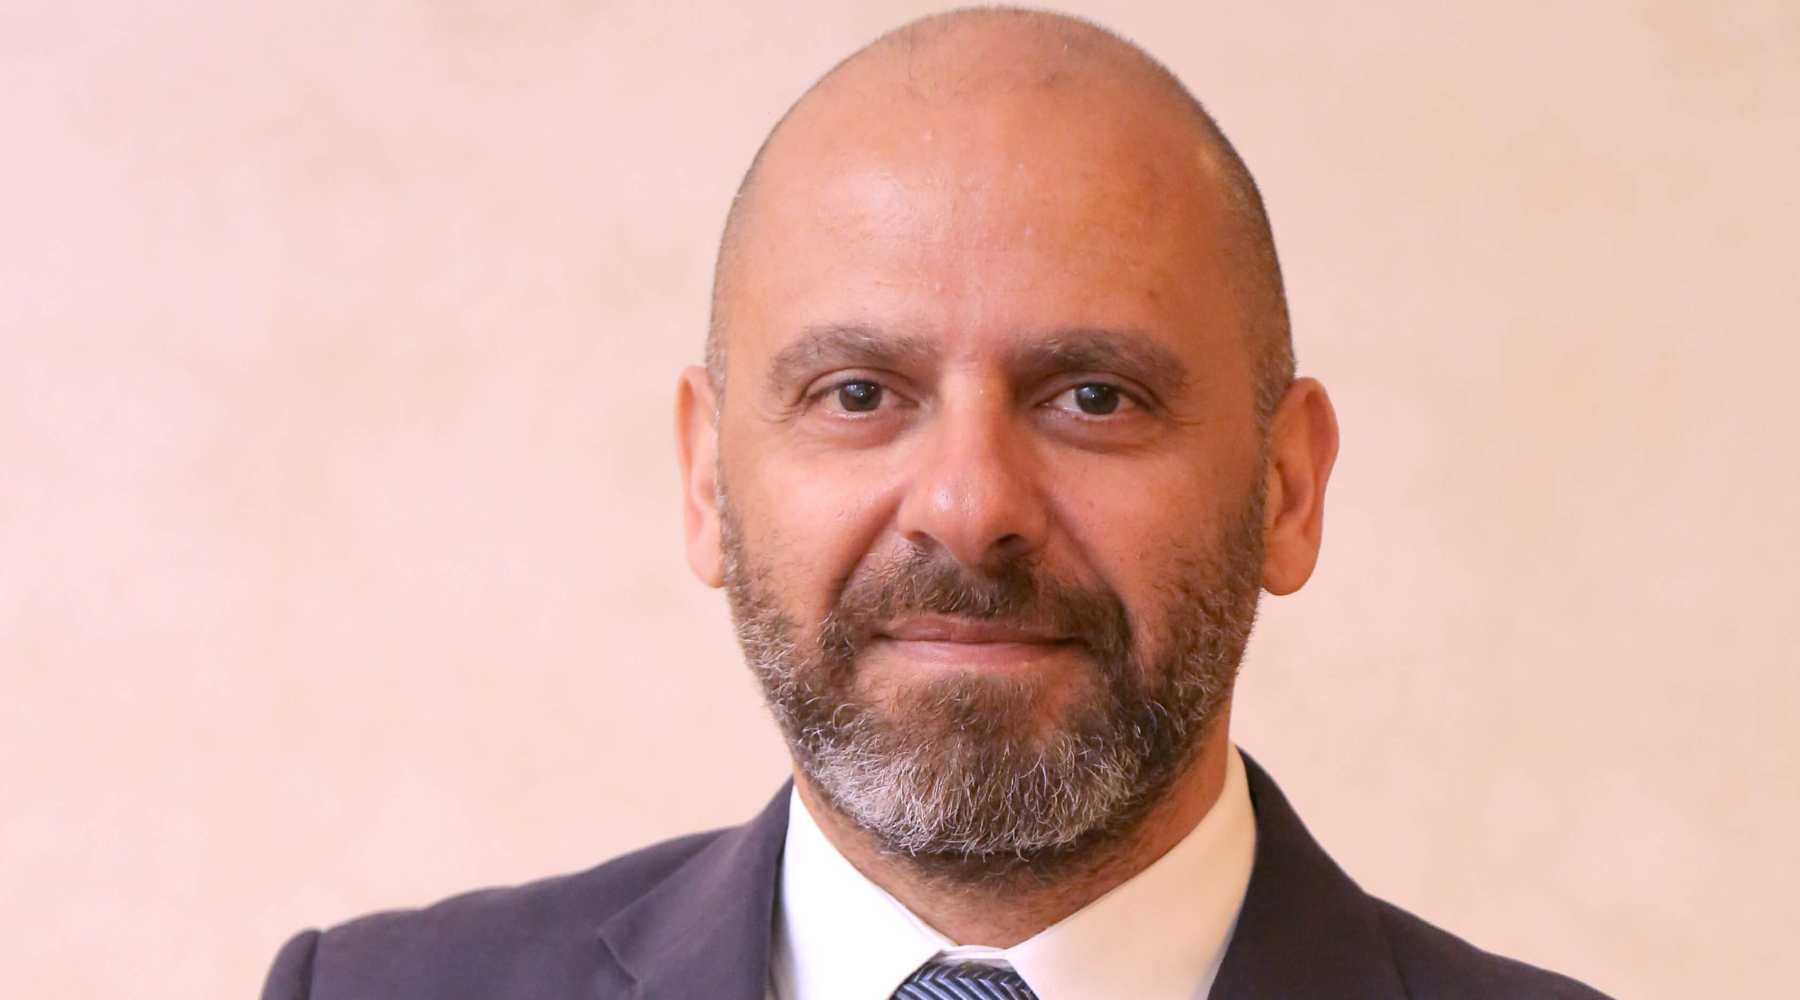 Elie Aoun Steps Down From His Role as Media CEO at Ipsos in MENA